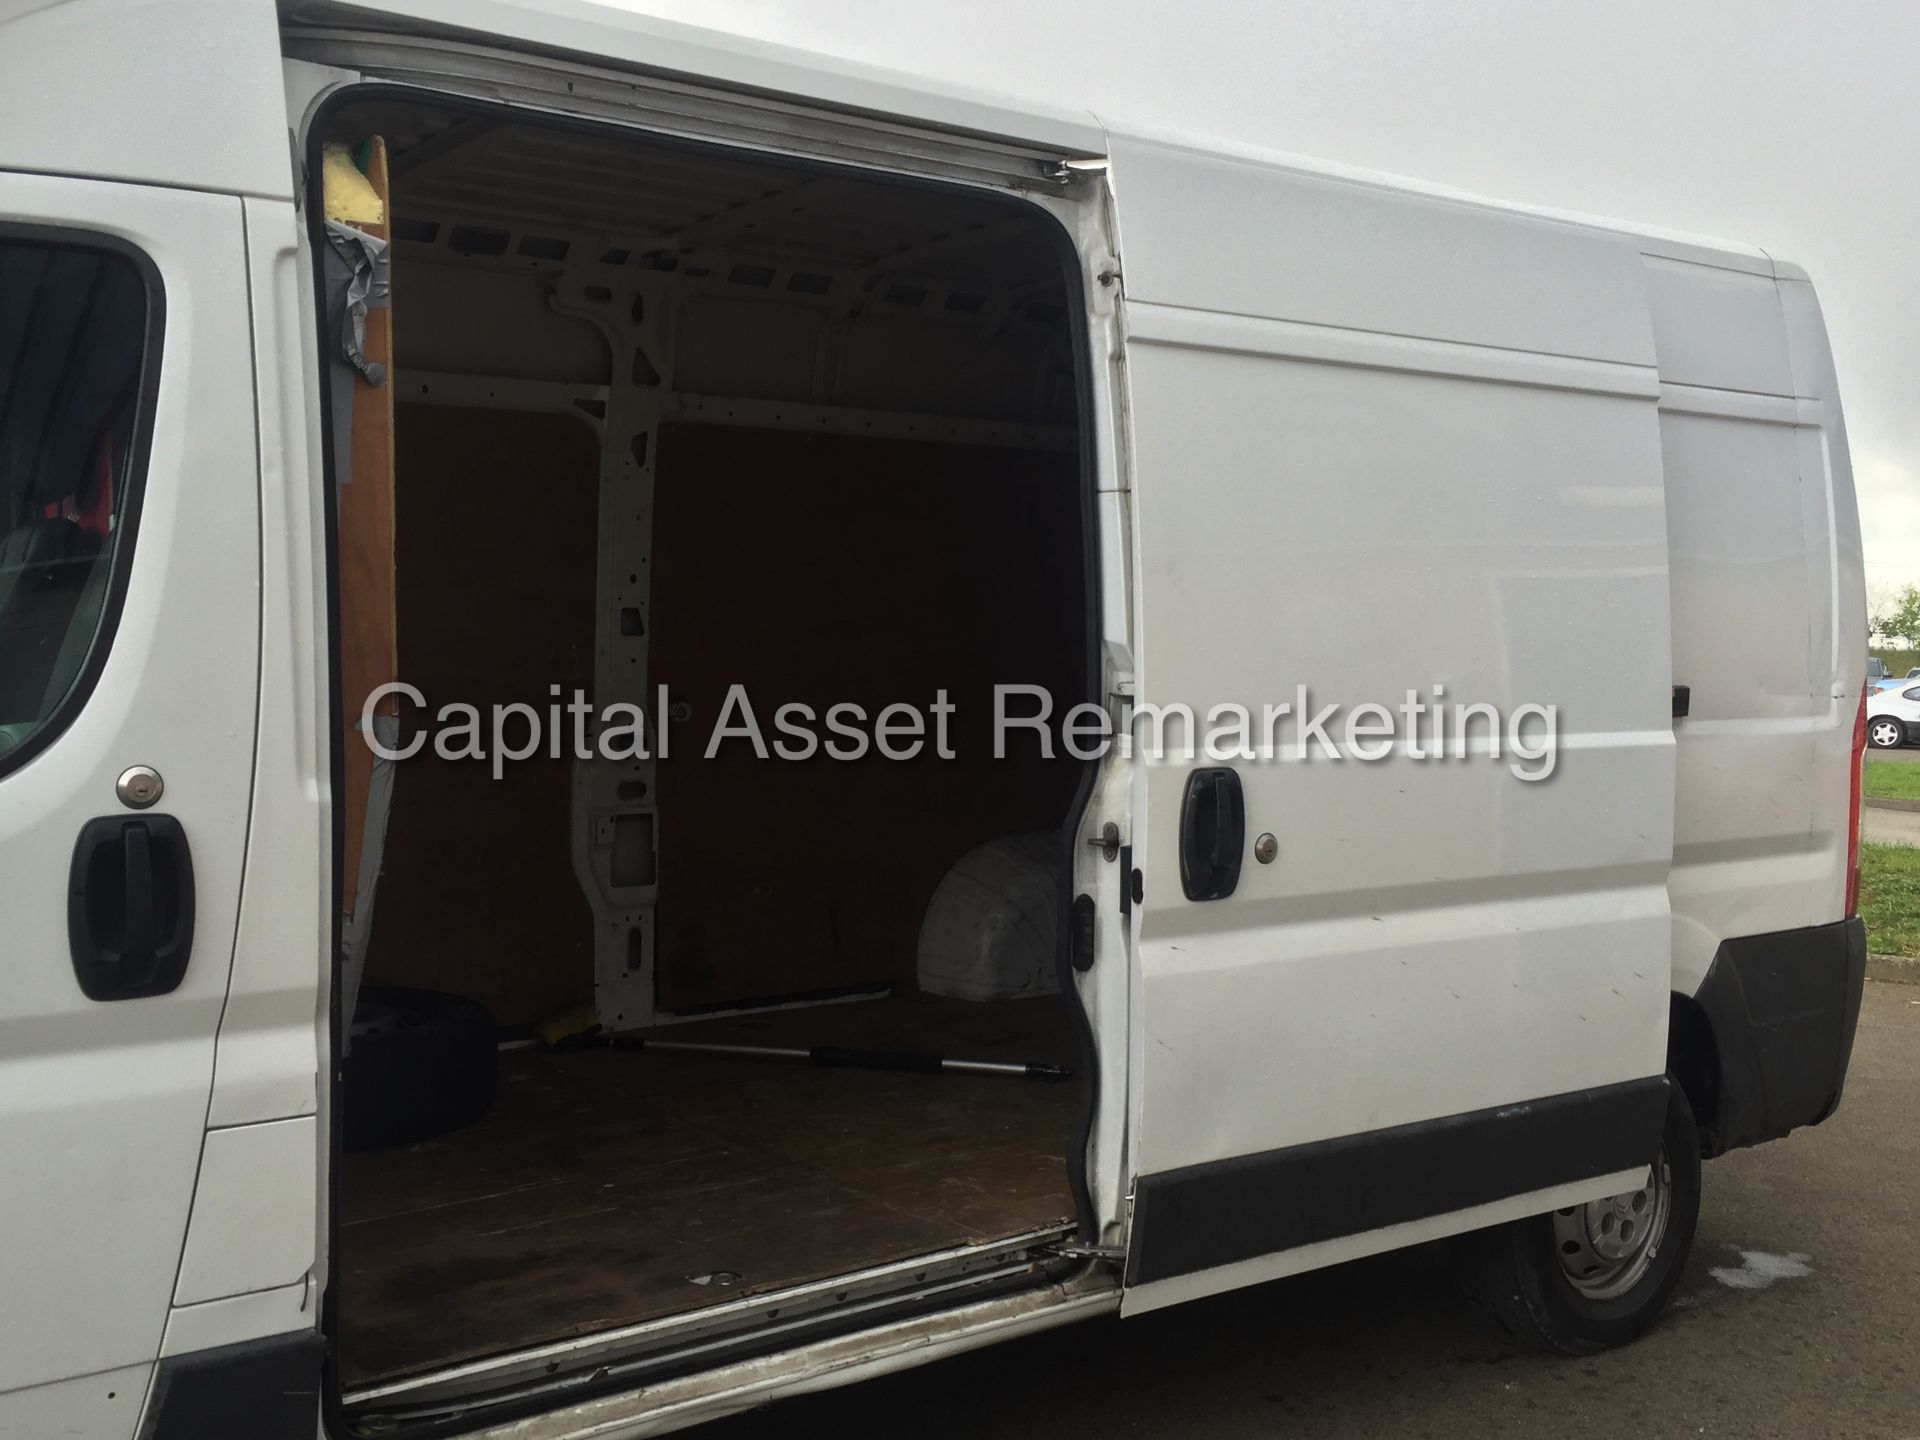 CITROEN RELAY 35 LWB HI-ROOF (2011 MODEL) 2.2 HDI - 120 PS - 6 SPEED (ELECTRIC PACK) - Image 14 of 19